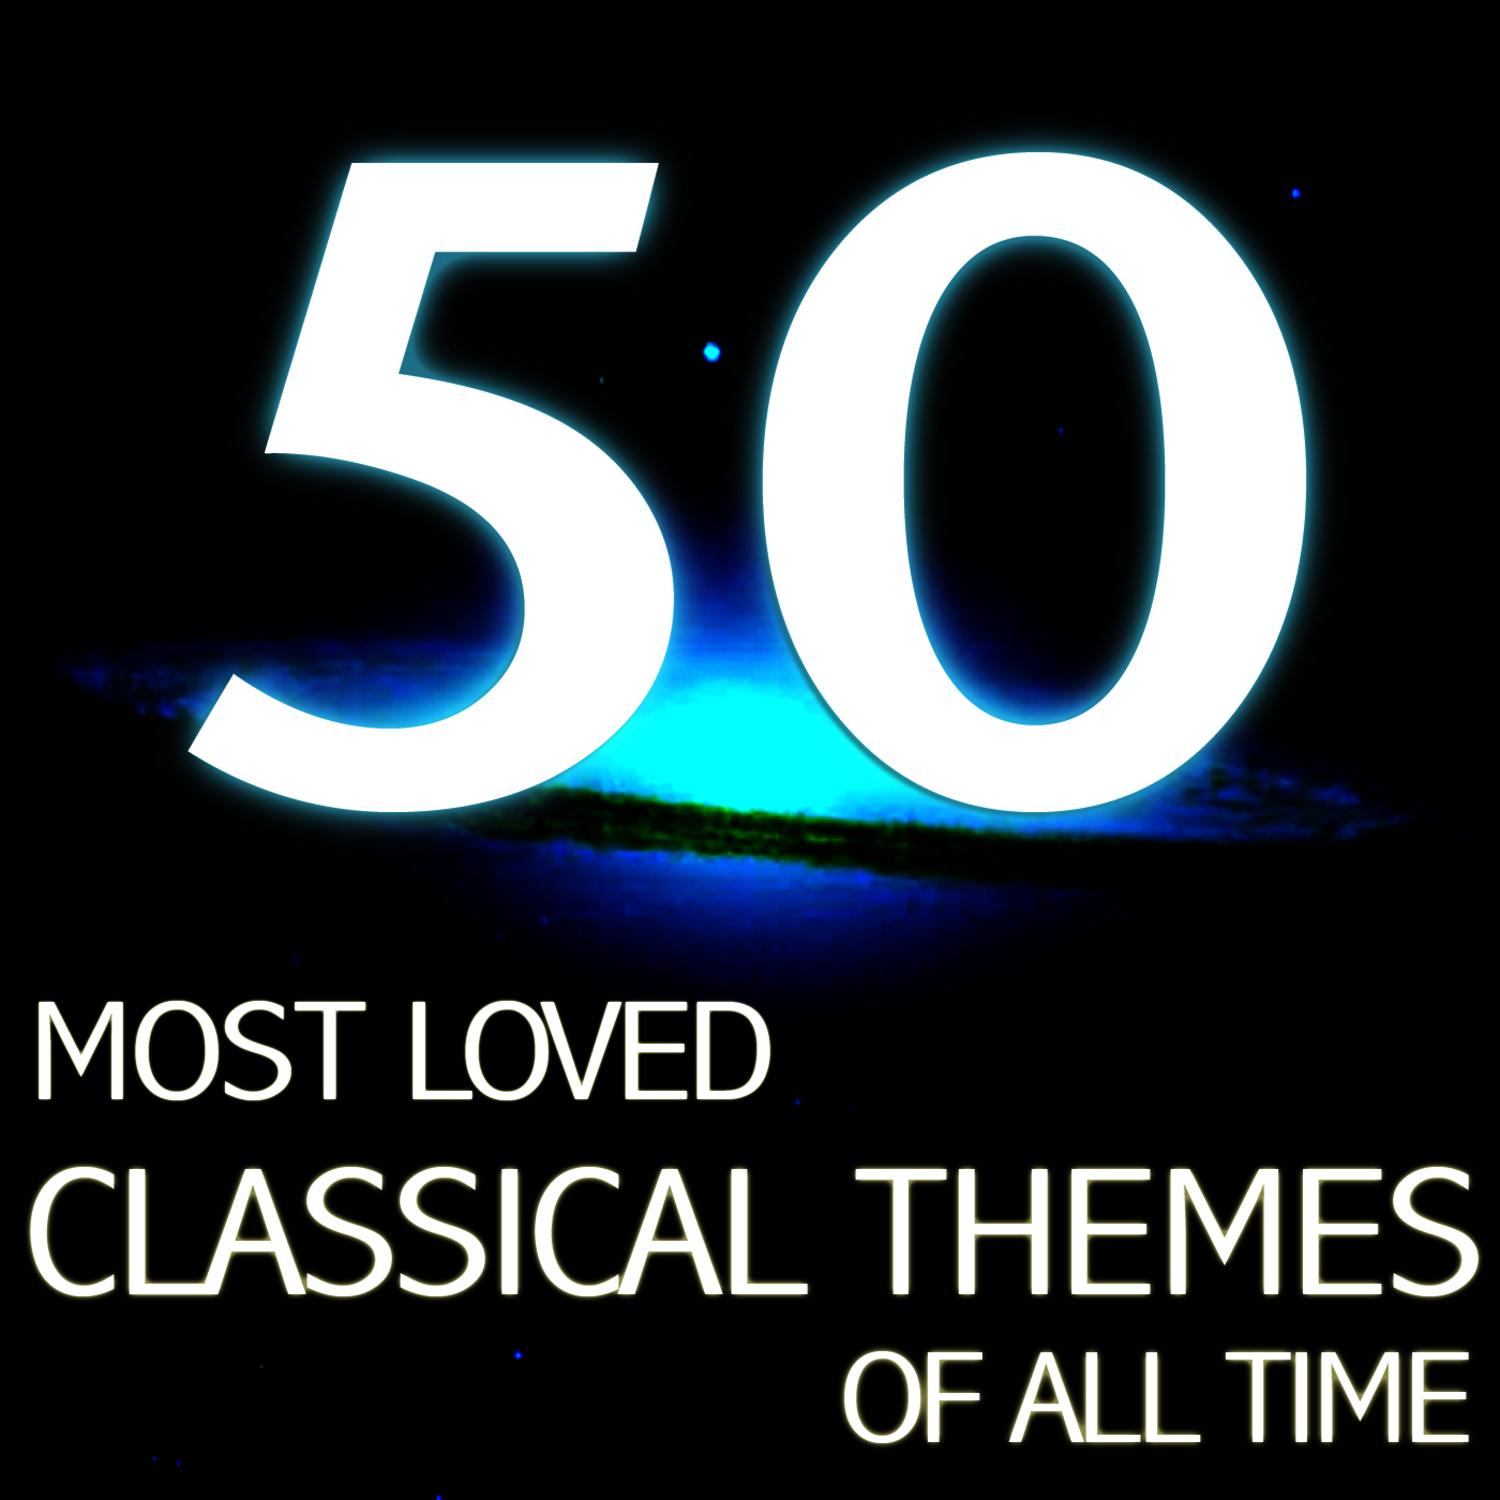 The 50 Most Loved Classical Themes